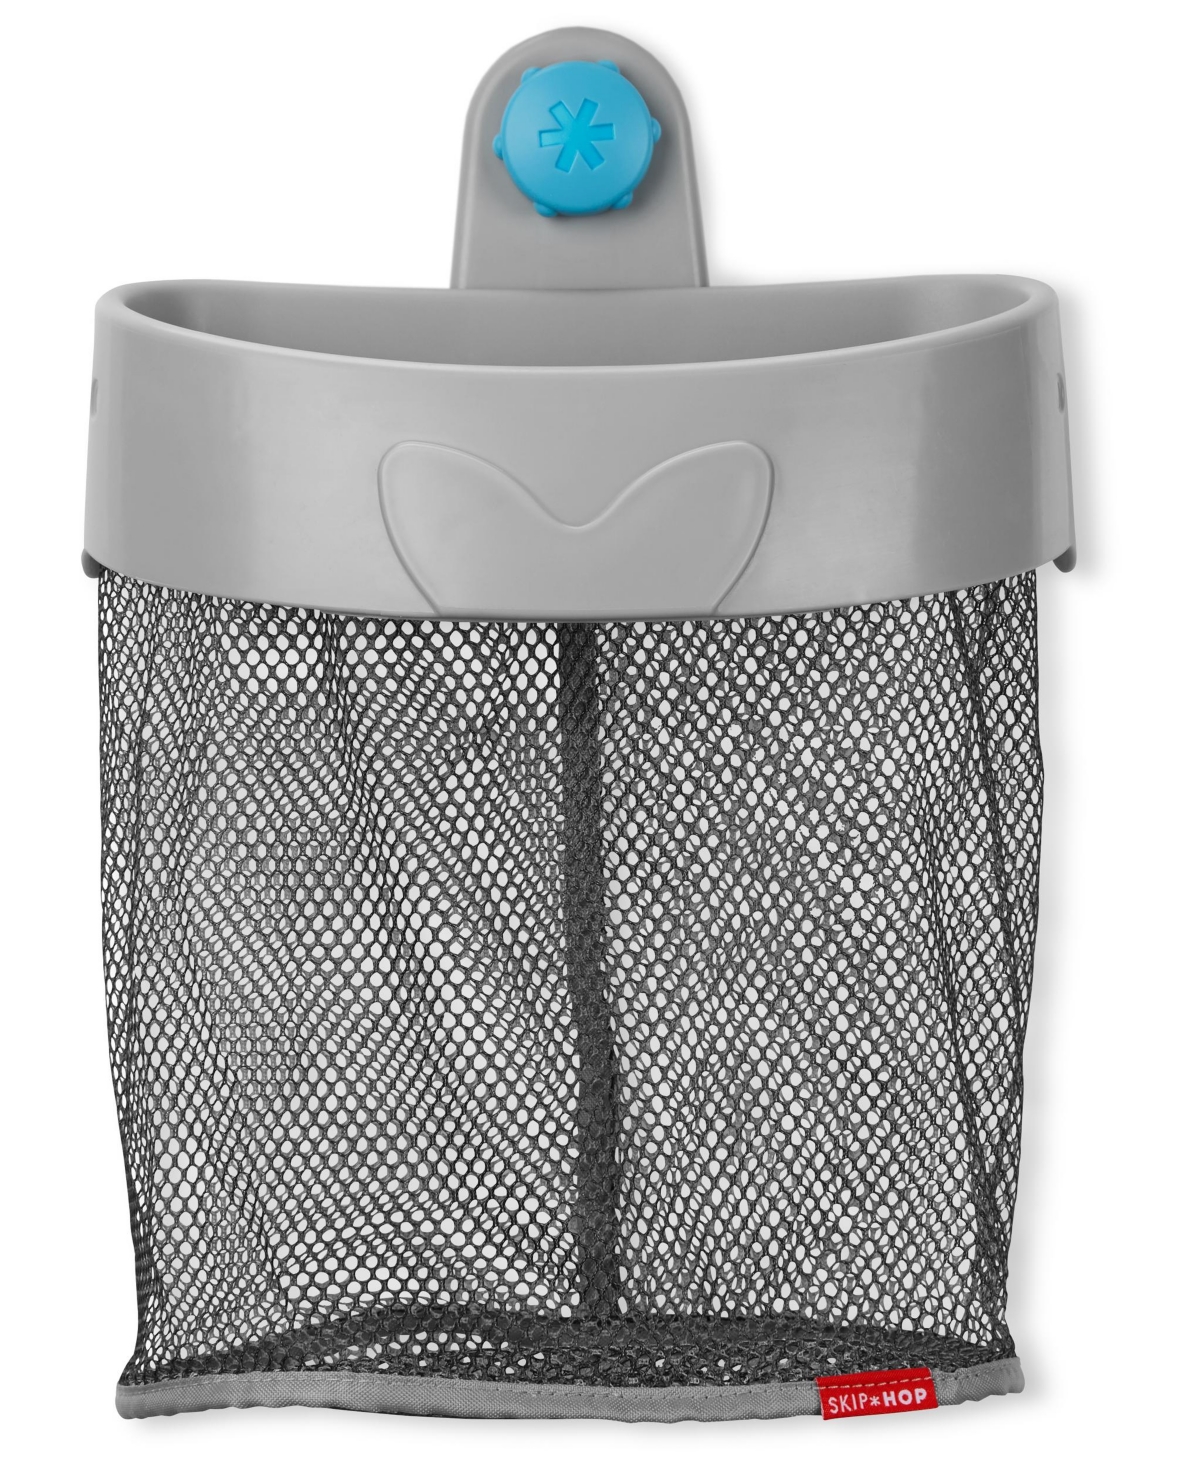 Skip Hop Moby Get The Scoop Bath Toy Organizer In Gray